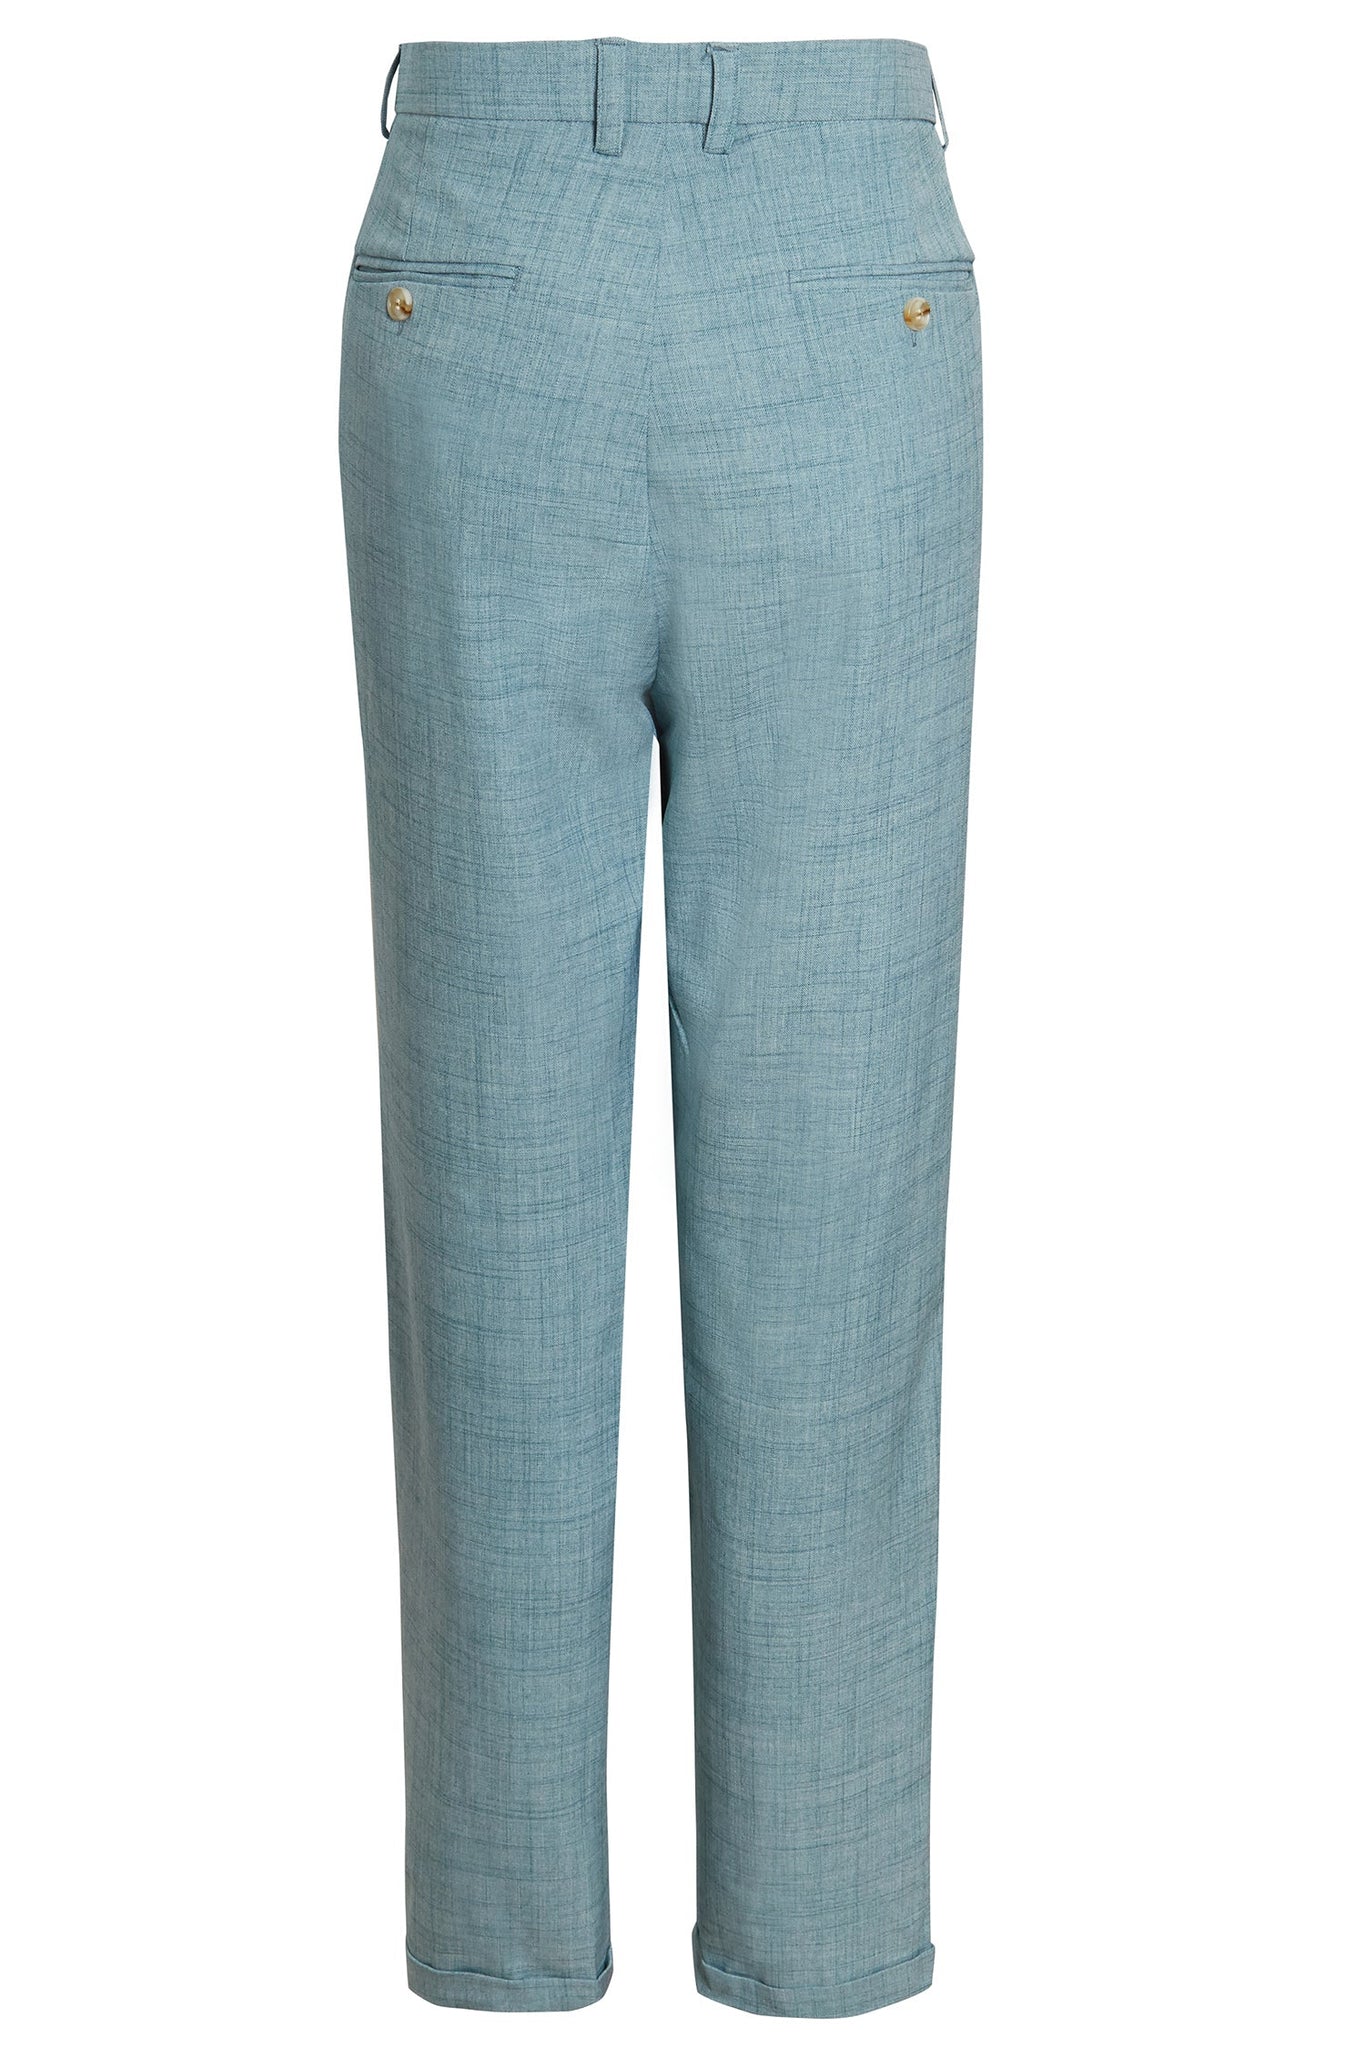 SLIM FIT TAILORED TROUSER